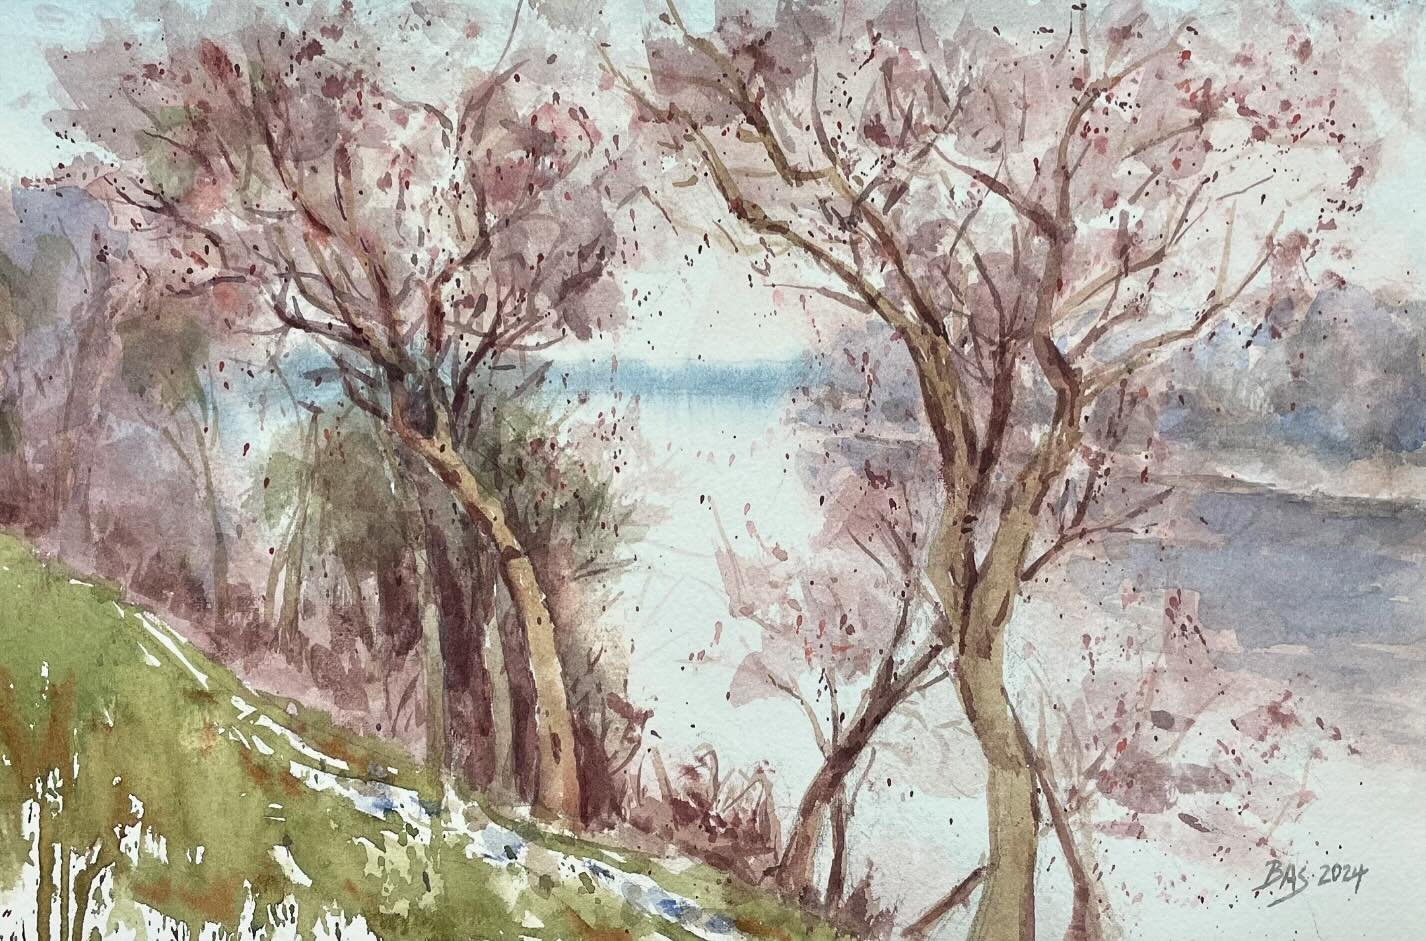 Trees on the Sacramento river. Been wanting to paint this for quite a while and finally did. Pretty happy with the outcome luckily. 

Enjoy your weekend and find some time to work on art 😊